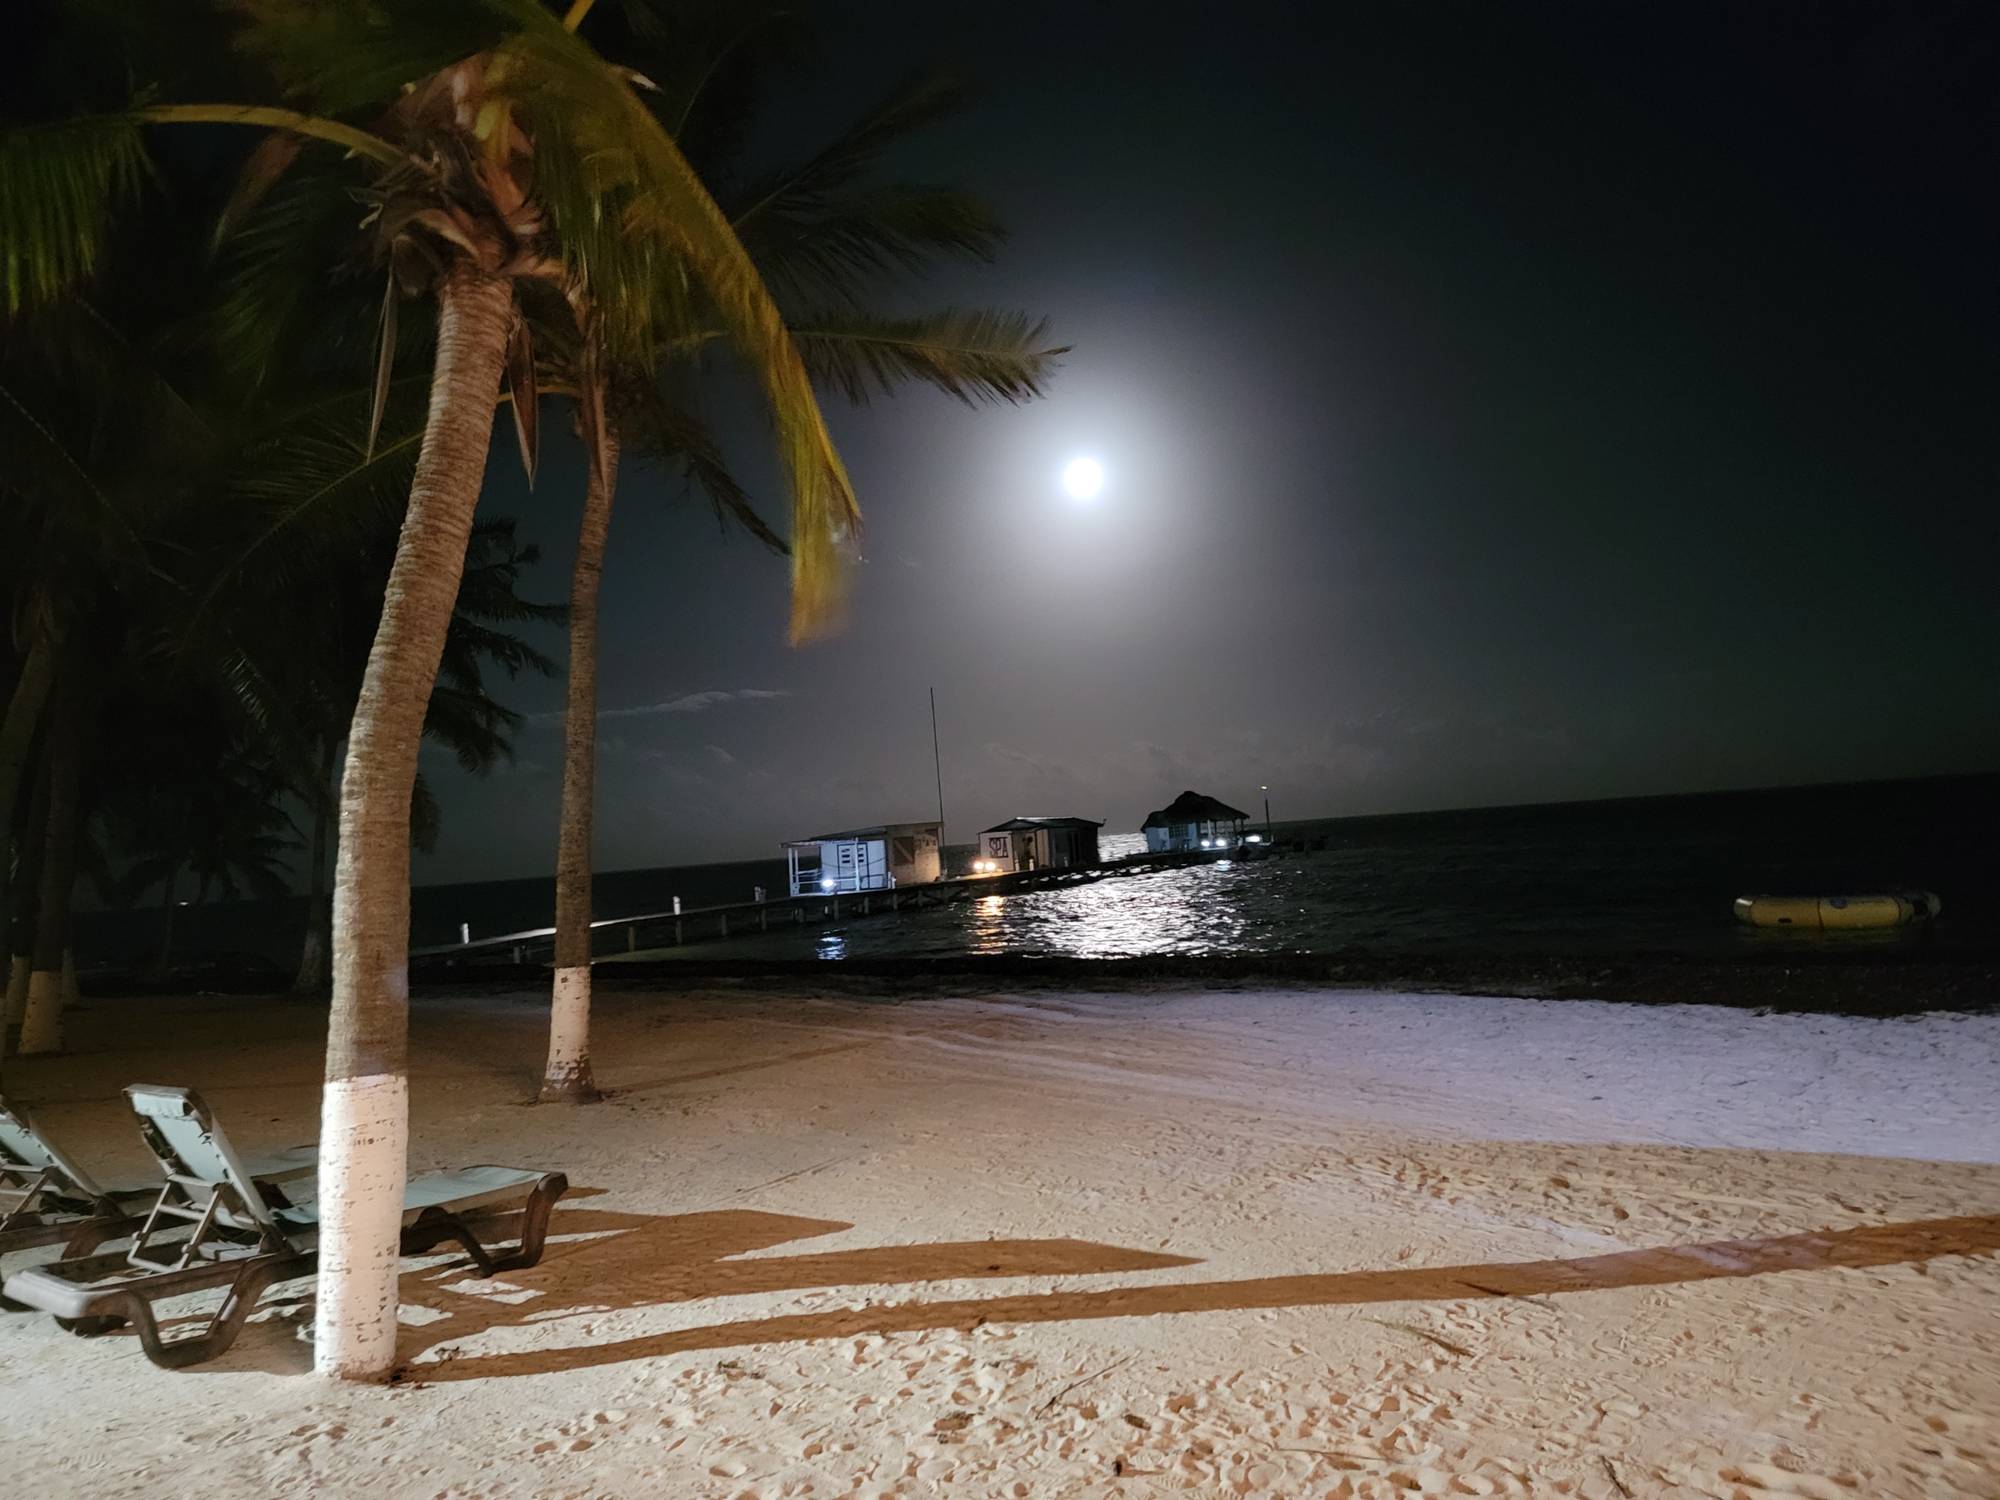 A full moon beach scene on the night of our arrival to San Pedro.